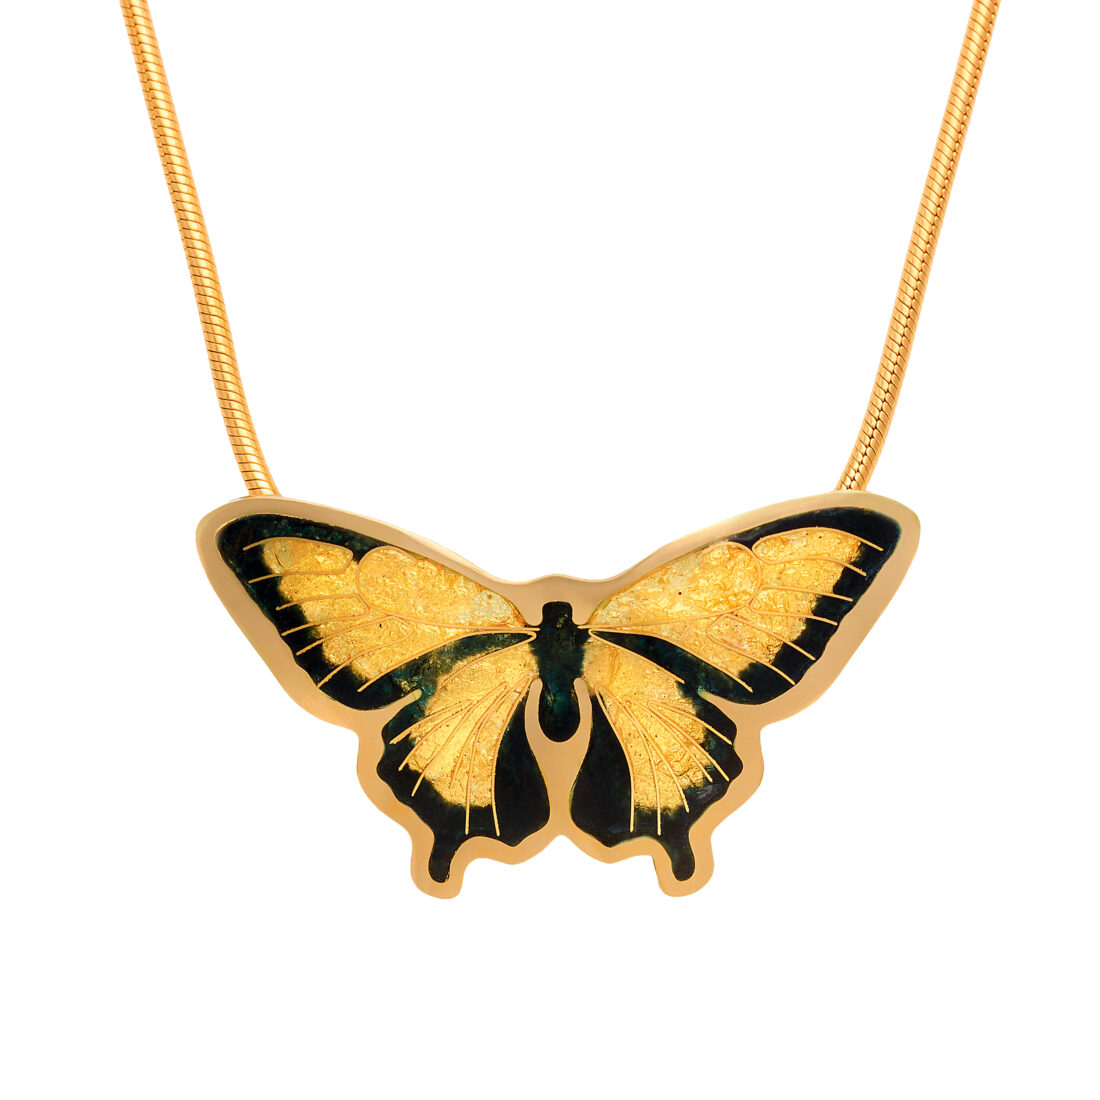 Description: Shirley Matteson's "Lovey" swallowtail butterfly necklace is crafted of eighteen-carat solid gold, enhanced with cloisonne enameling artwork, and accompanied with a chain and rosewood box, $1,350.